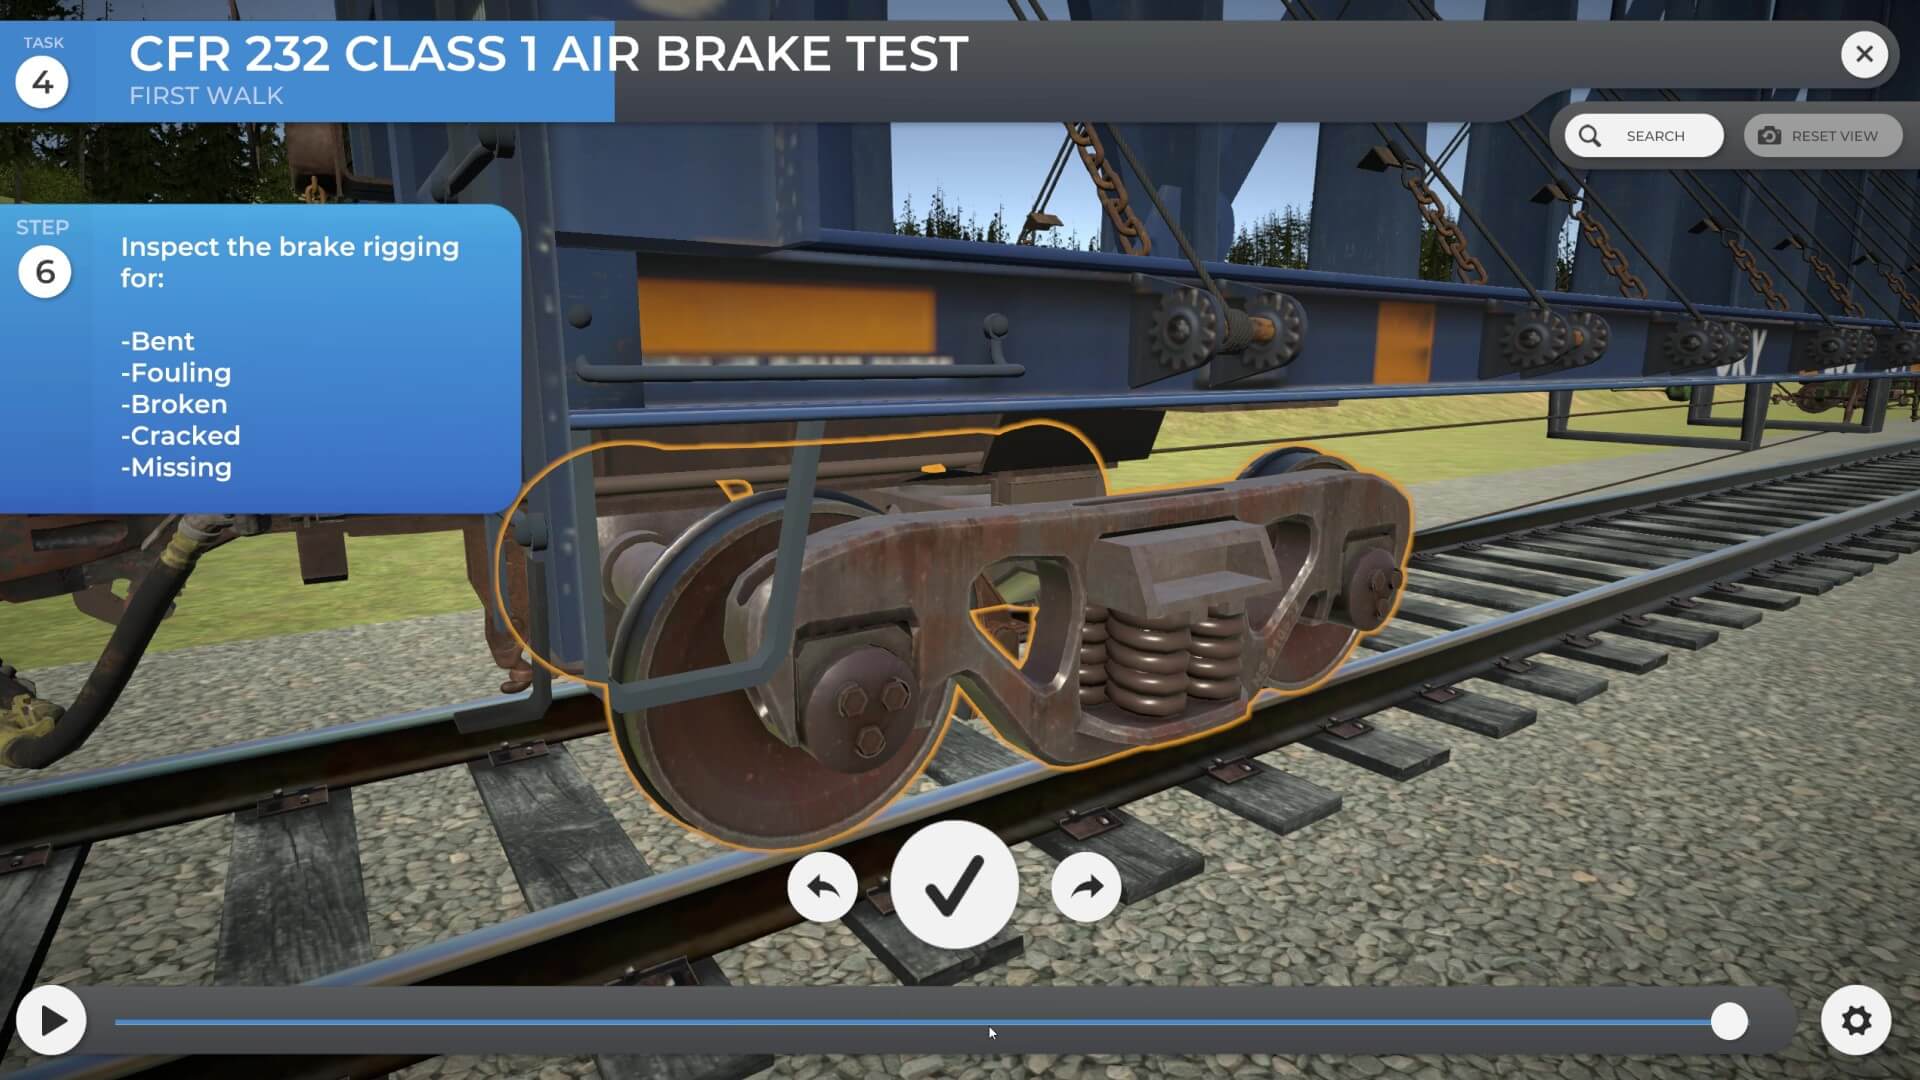 Train faster, safer with this Air Brake Test Virtual Interactive Guide (Job  Aid)